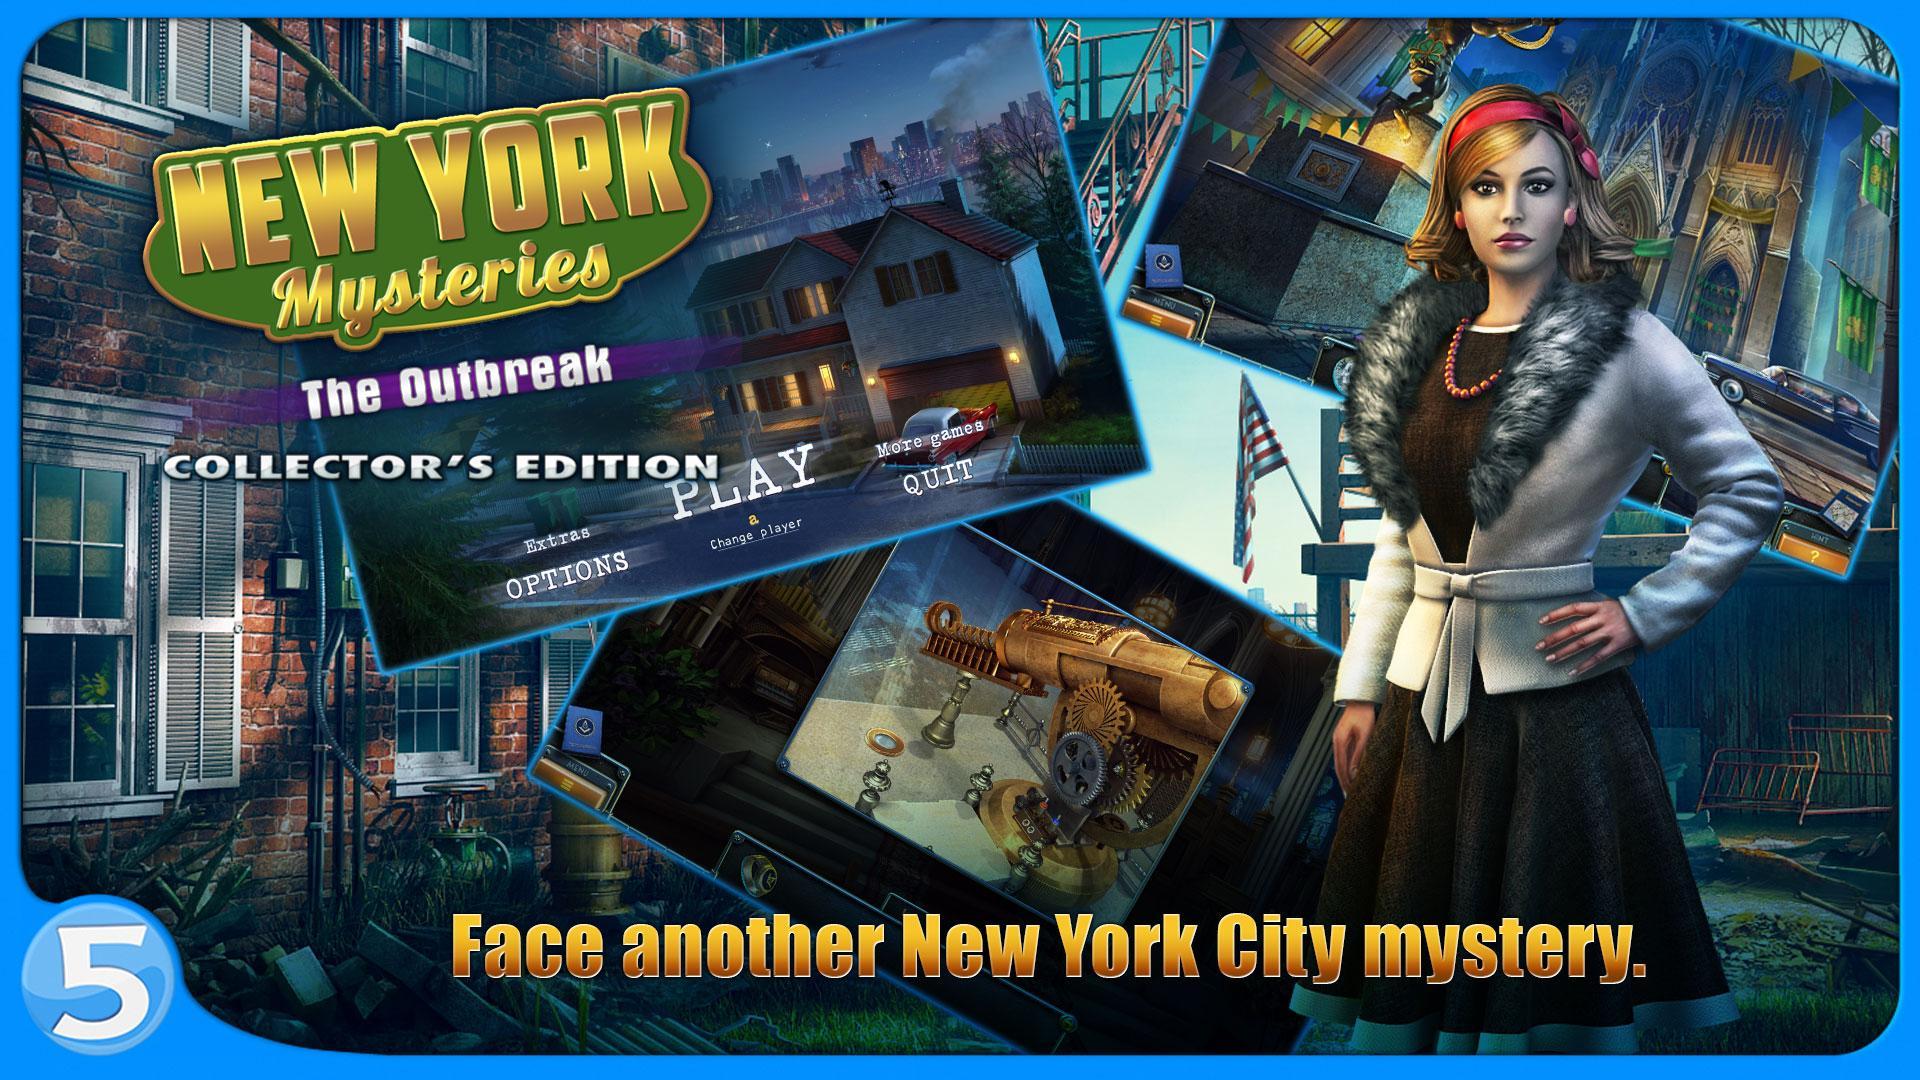 New York Mysteries: The Outbreak (free to play) 2.0.1.923.49 Screenshot 6